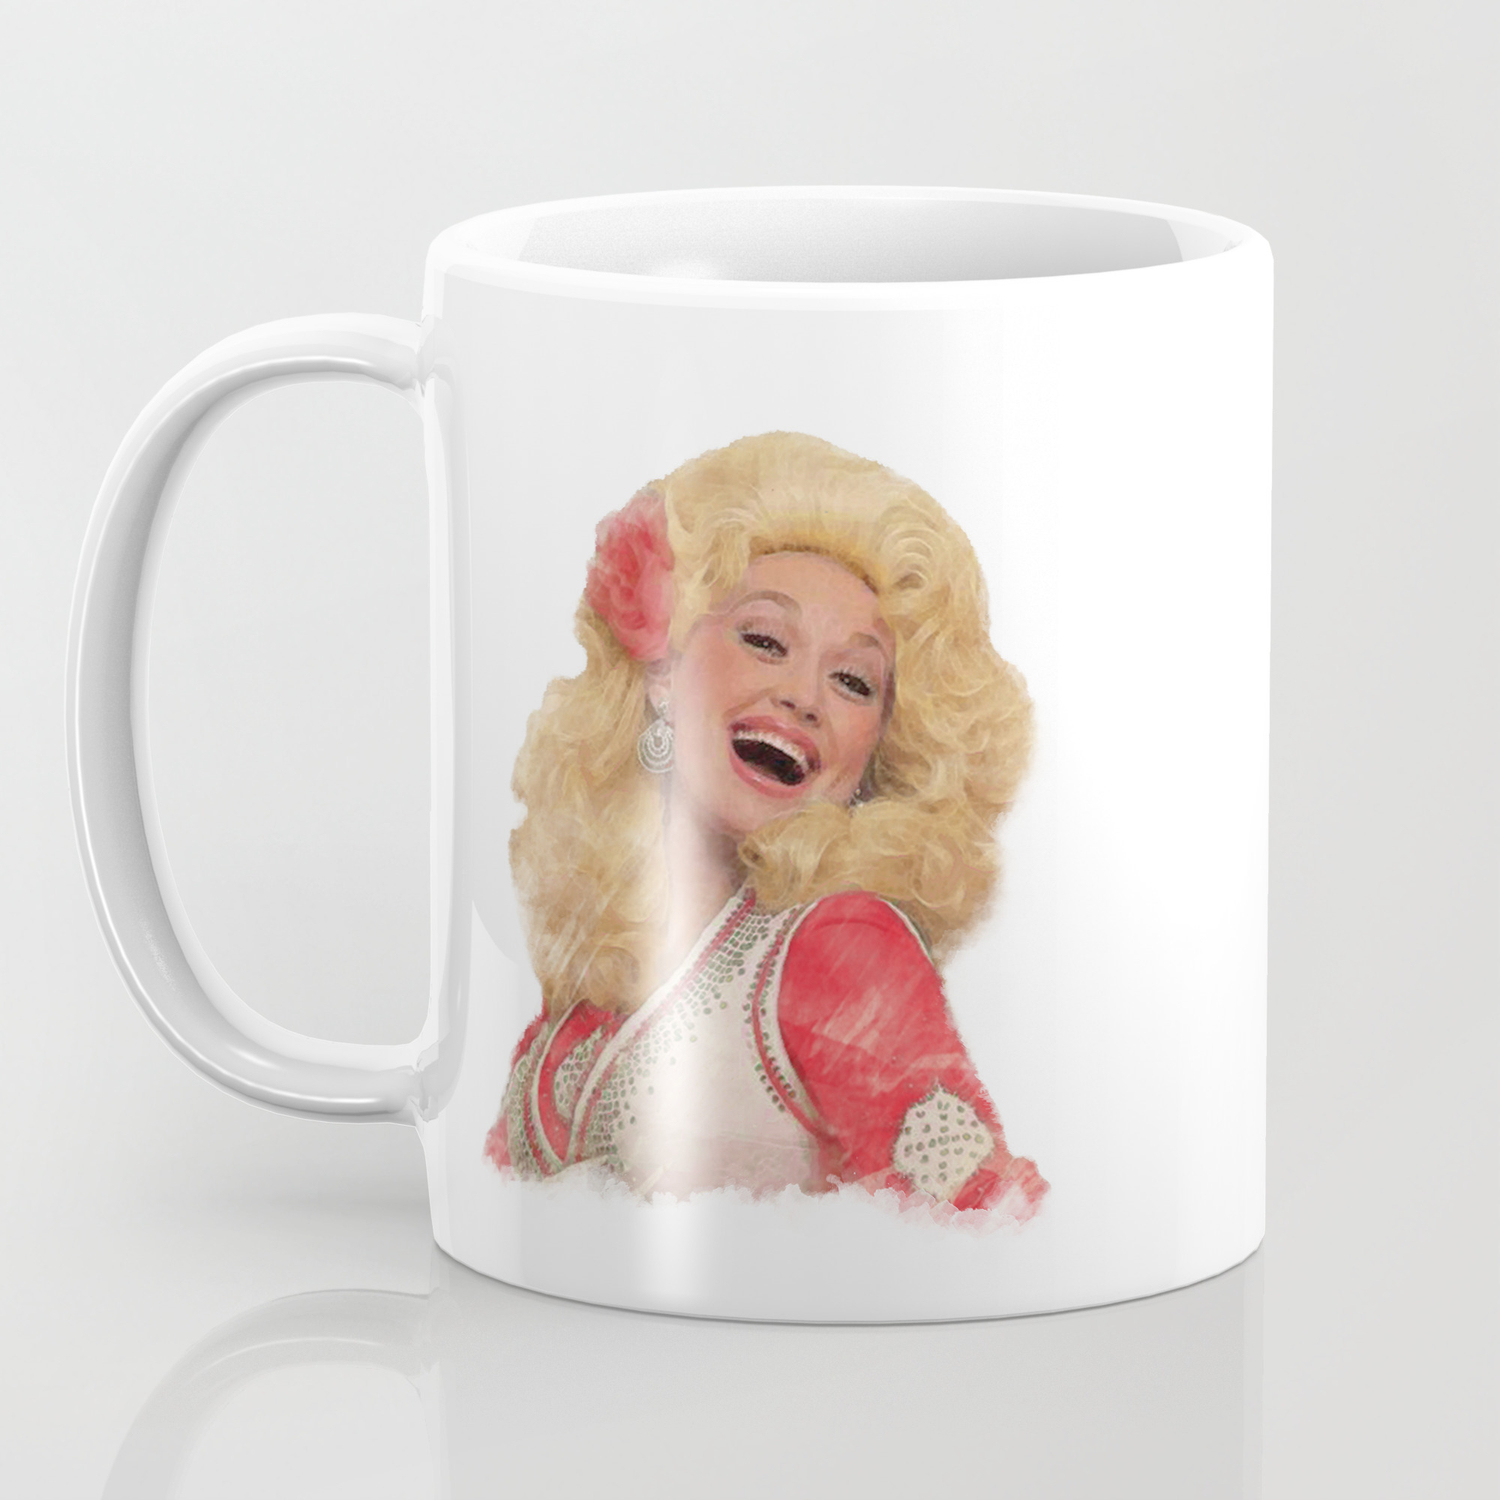 Details about   Dolly Parton 65th Anniversary Coffee Mug